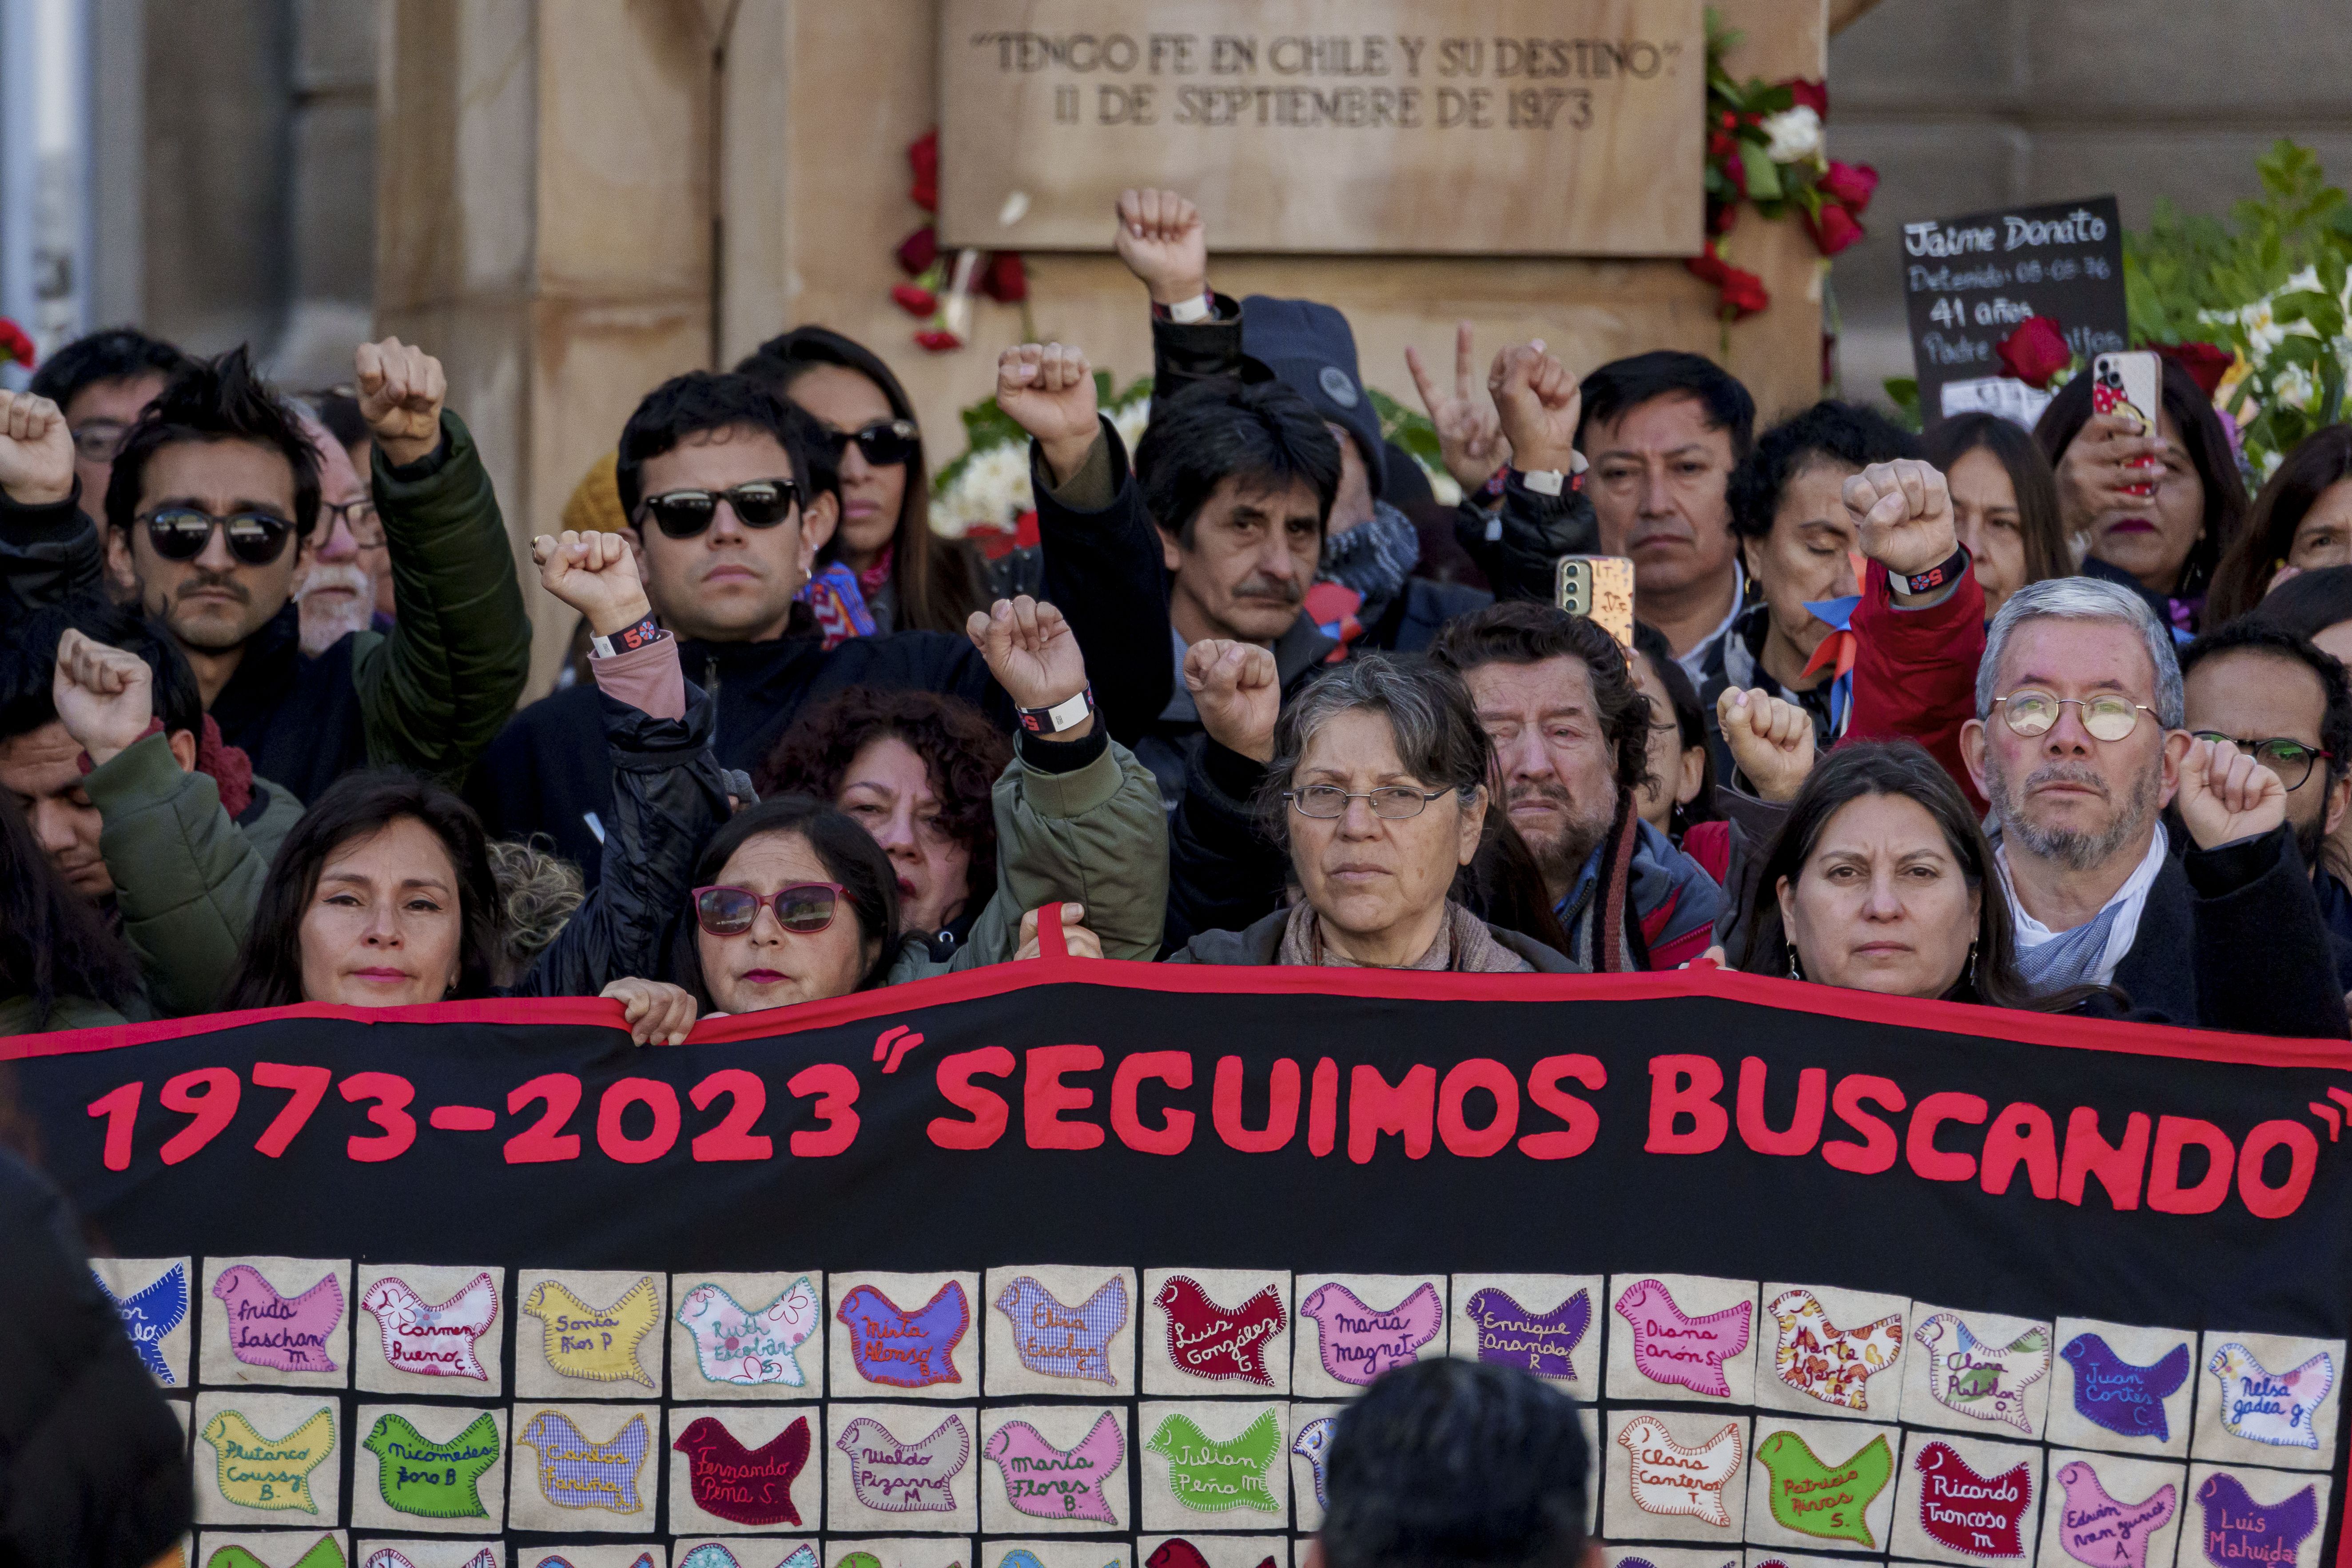 Many people hold their fists in the air while marching in Chile to commemorate the 50-year mark of the coup that overthrew the government. They hold a banner saying "1973-2023: We're still searching"